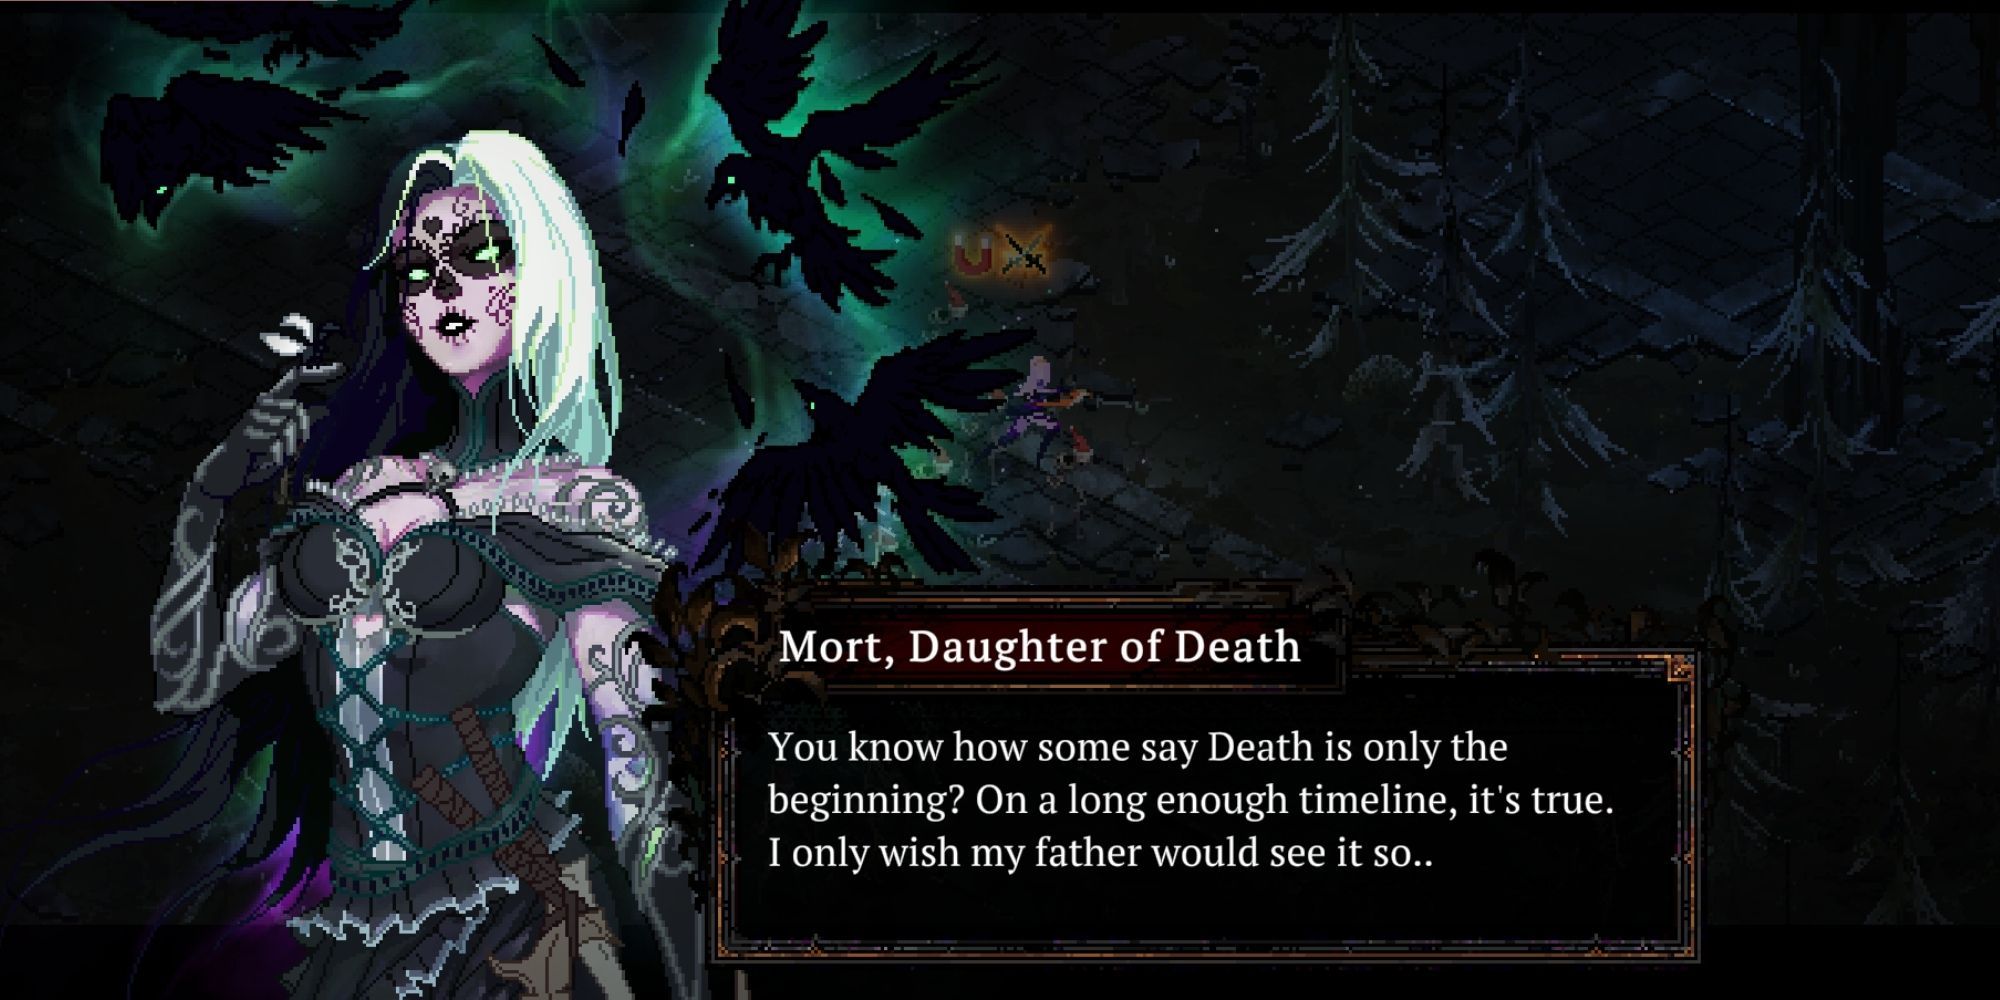 A dialogue with Mort, Death's daughter, who has ravens with glowing green energy near her, and is wearing black and green clothing.